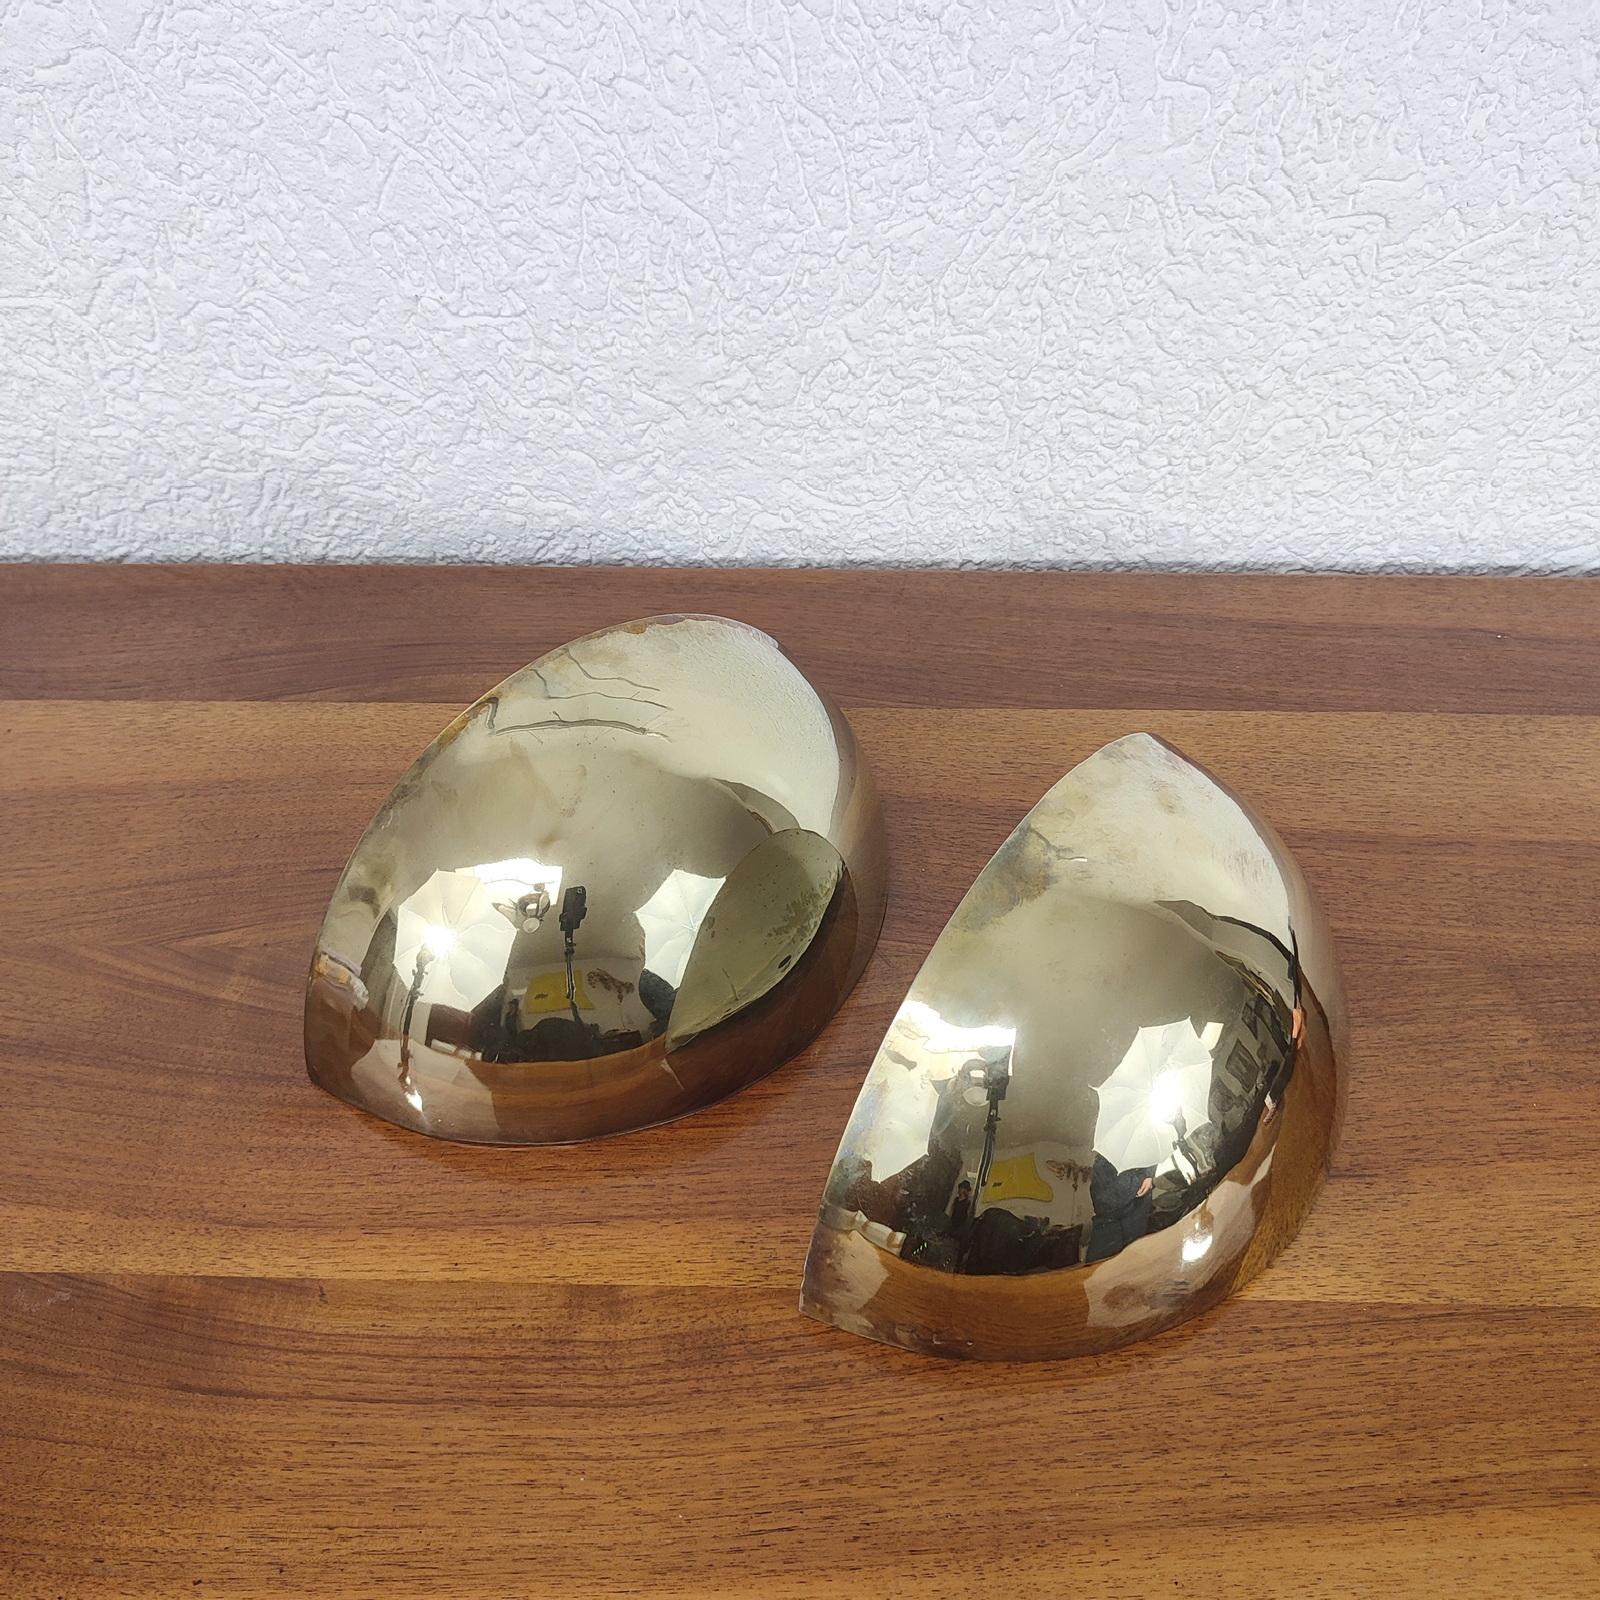 French Art Deco Half Moon Wall Lights, in the Tobia Scarpa's Quatro sconces style.
Made of brass-plated metal, they are in original condition, with traces of time, some bumps on sides, and patina.
Each marked 